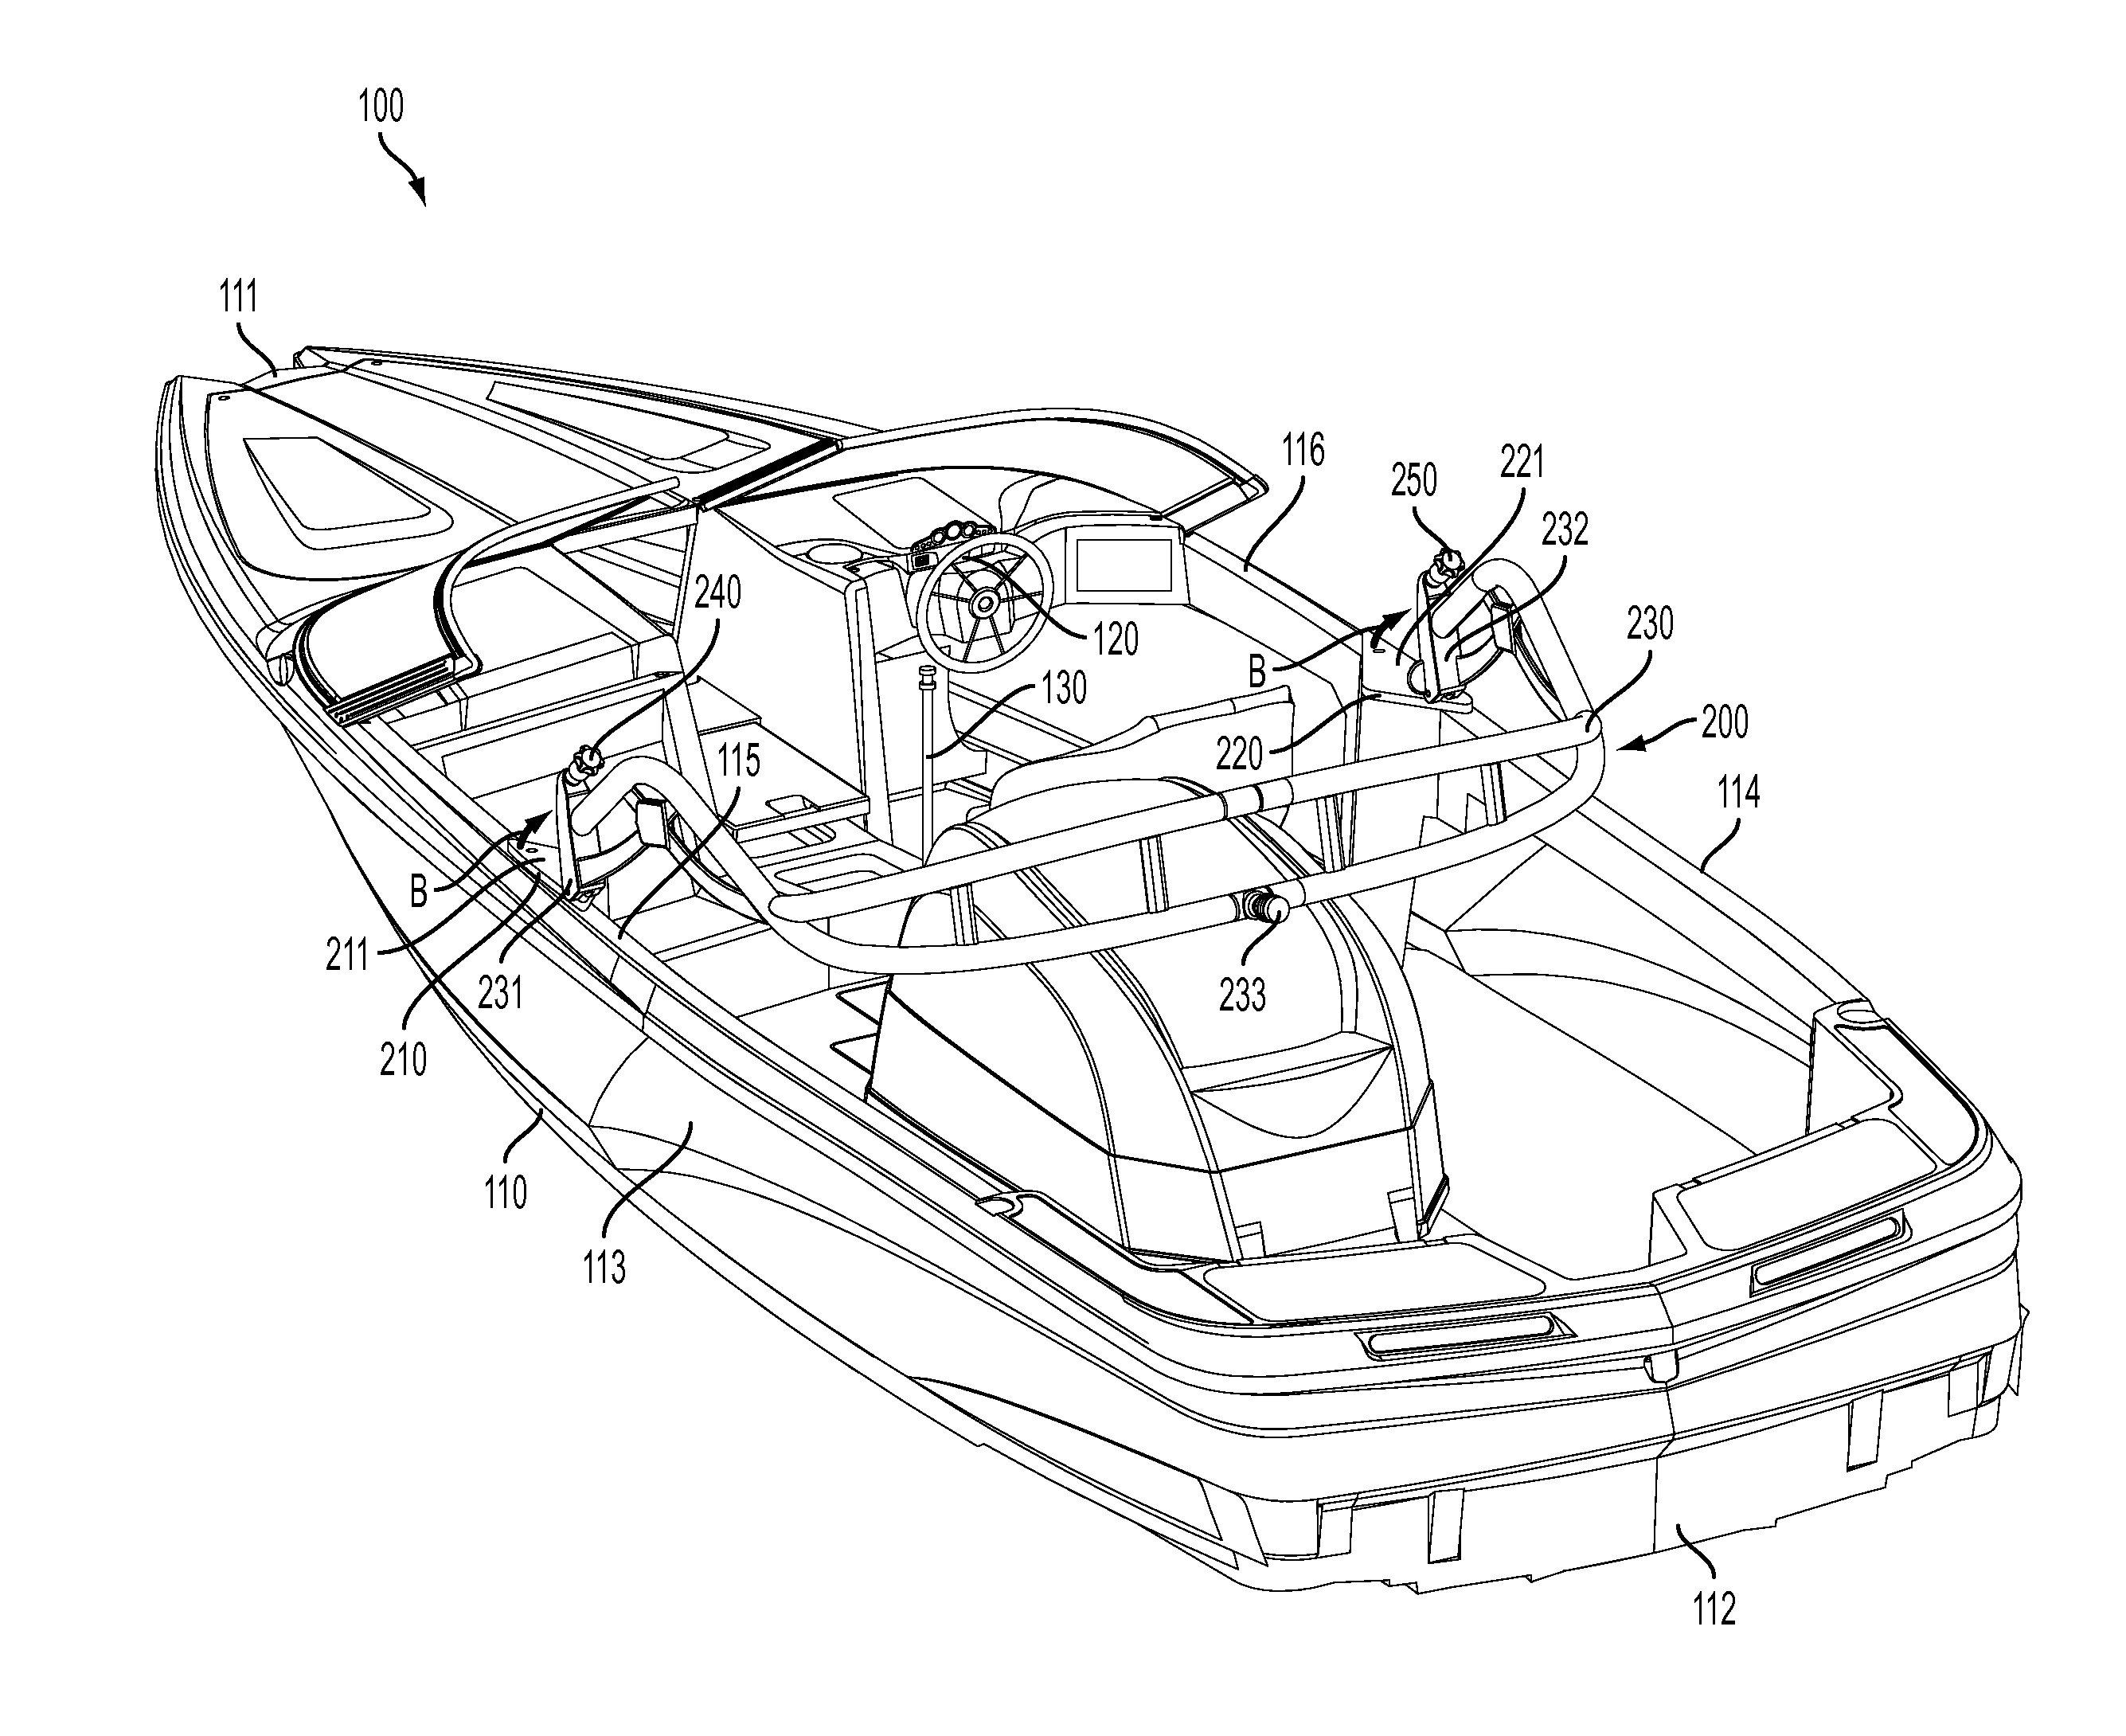 Apparatus for towing a water sports performer